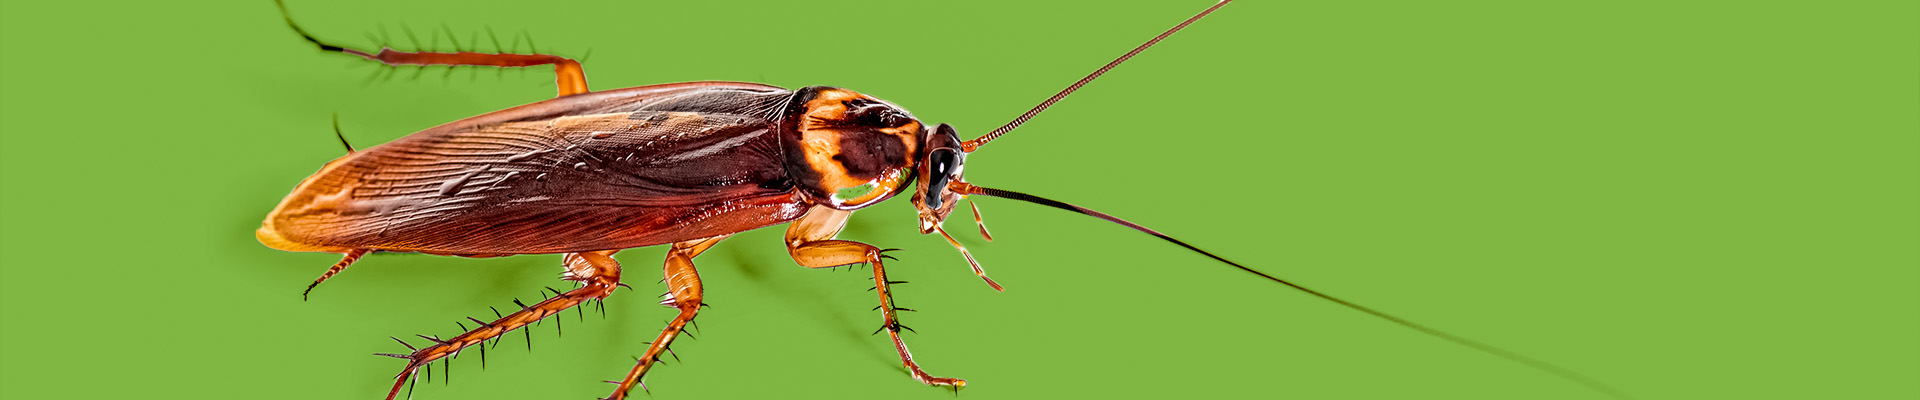 American Cockroach Page Header